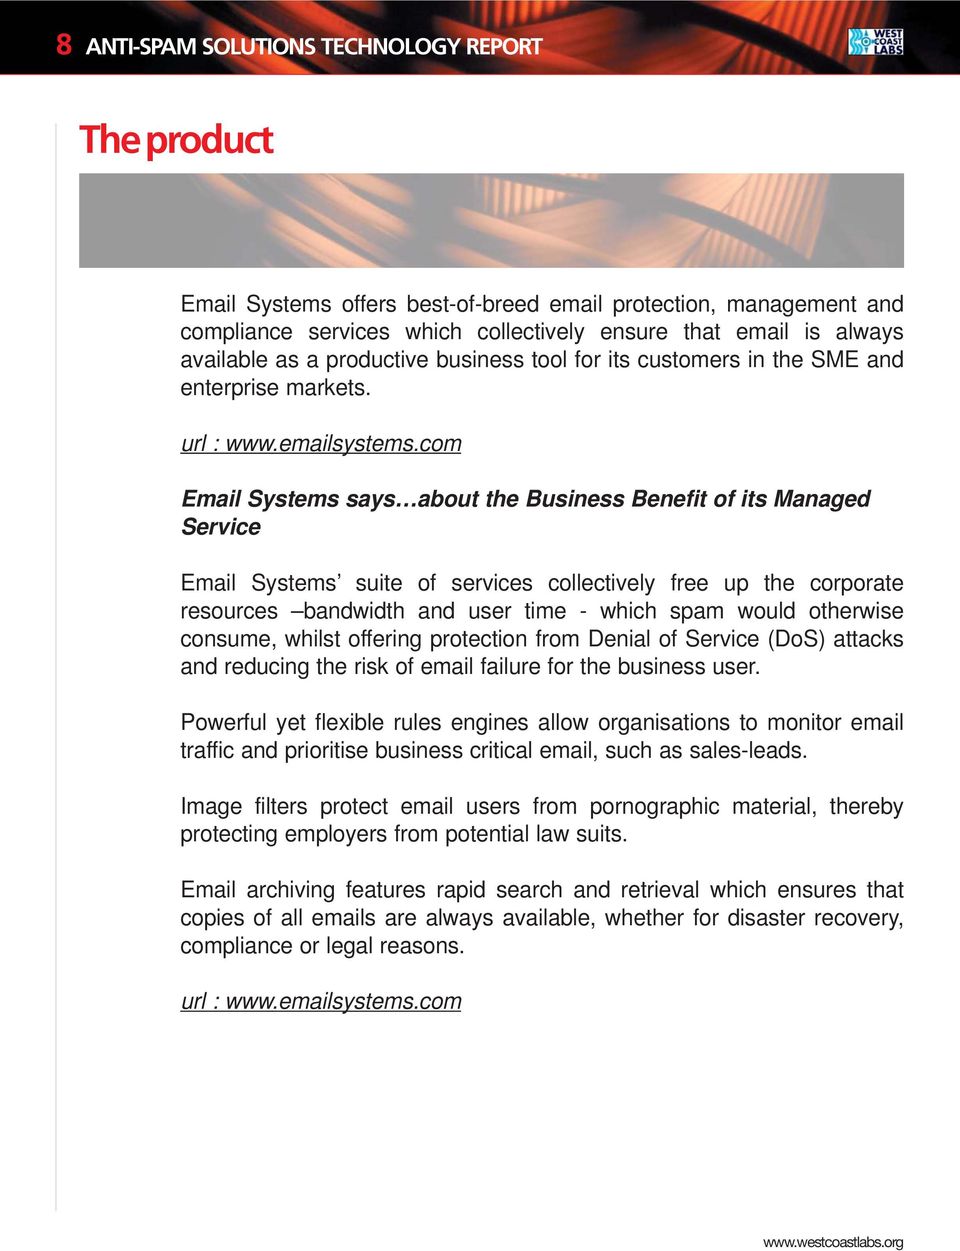 com Email Systems says about the Business Benefit of its Managed Service Email Systems suite of services collectively free up the corporate resources bandwidth and user time - which spam would